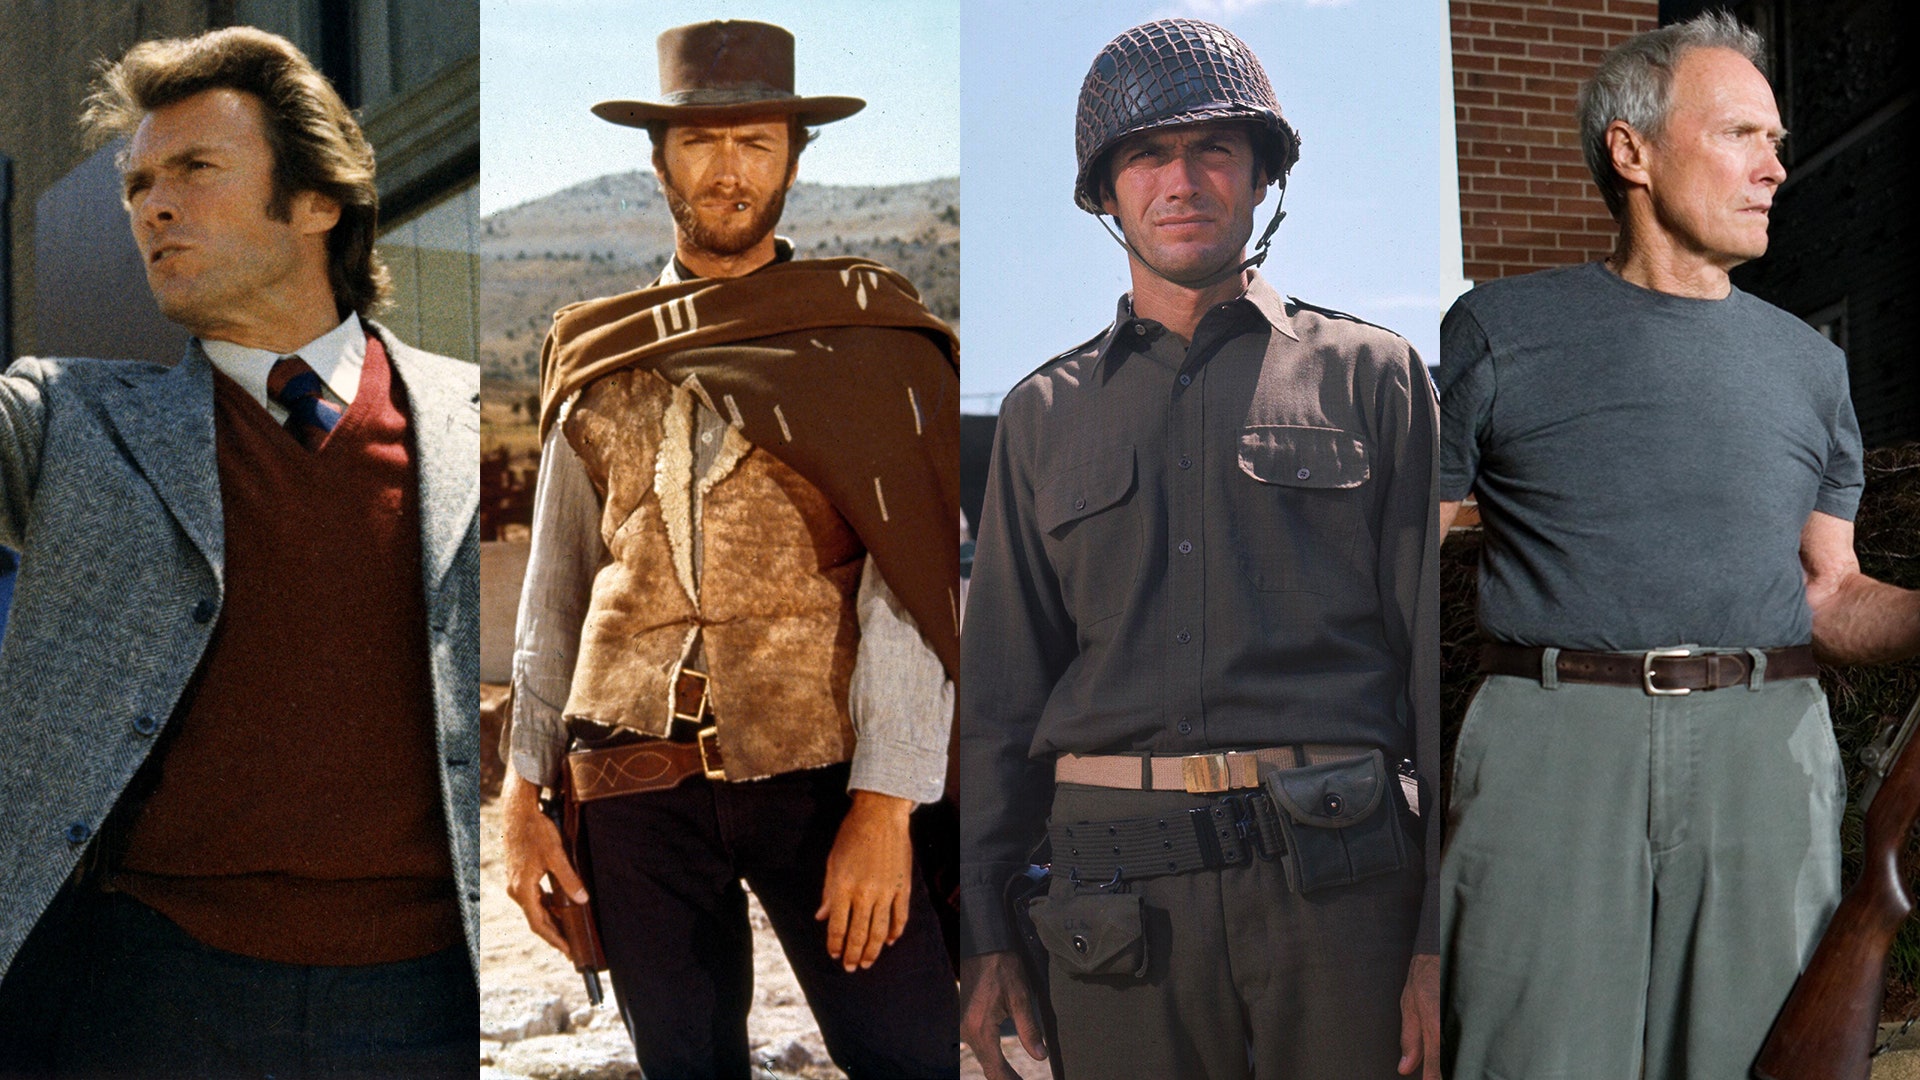 But then there was Clint Eastwood. 